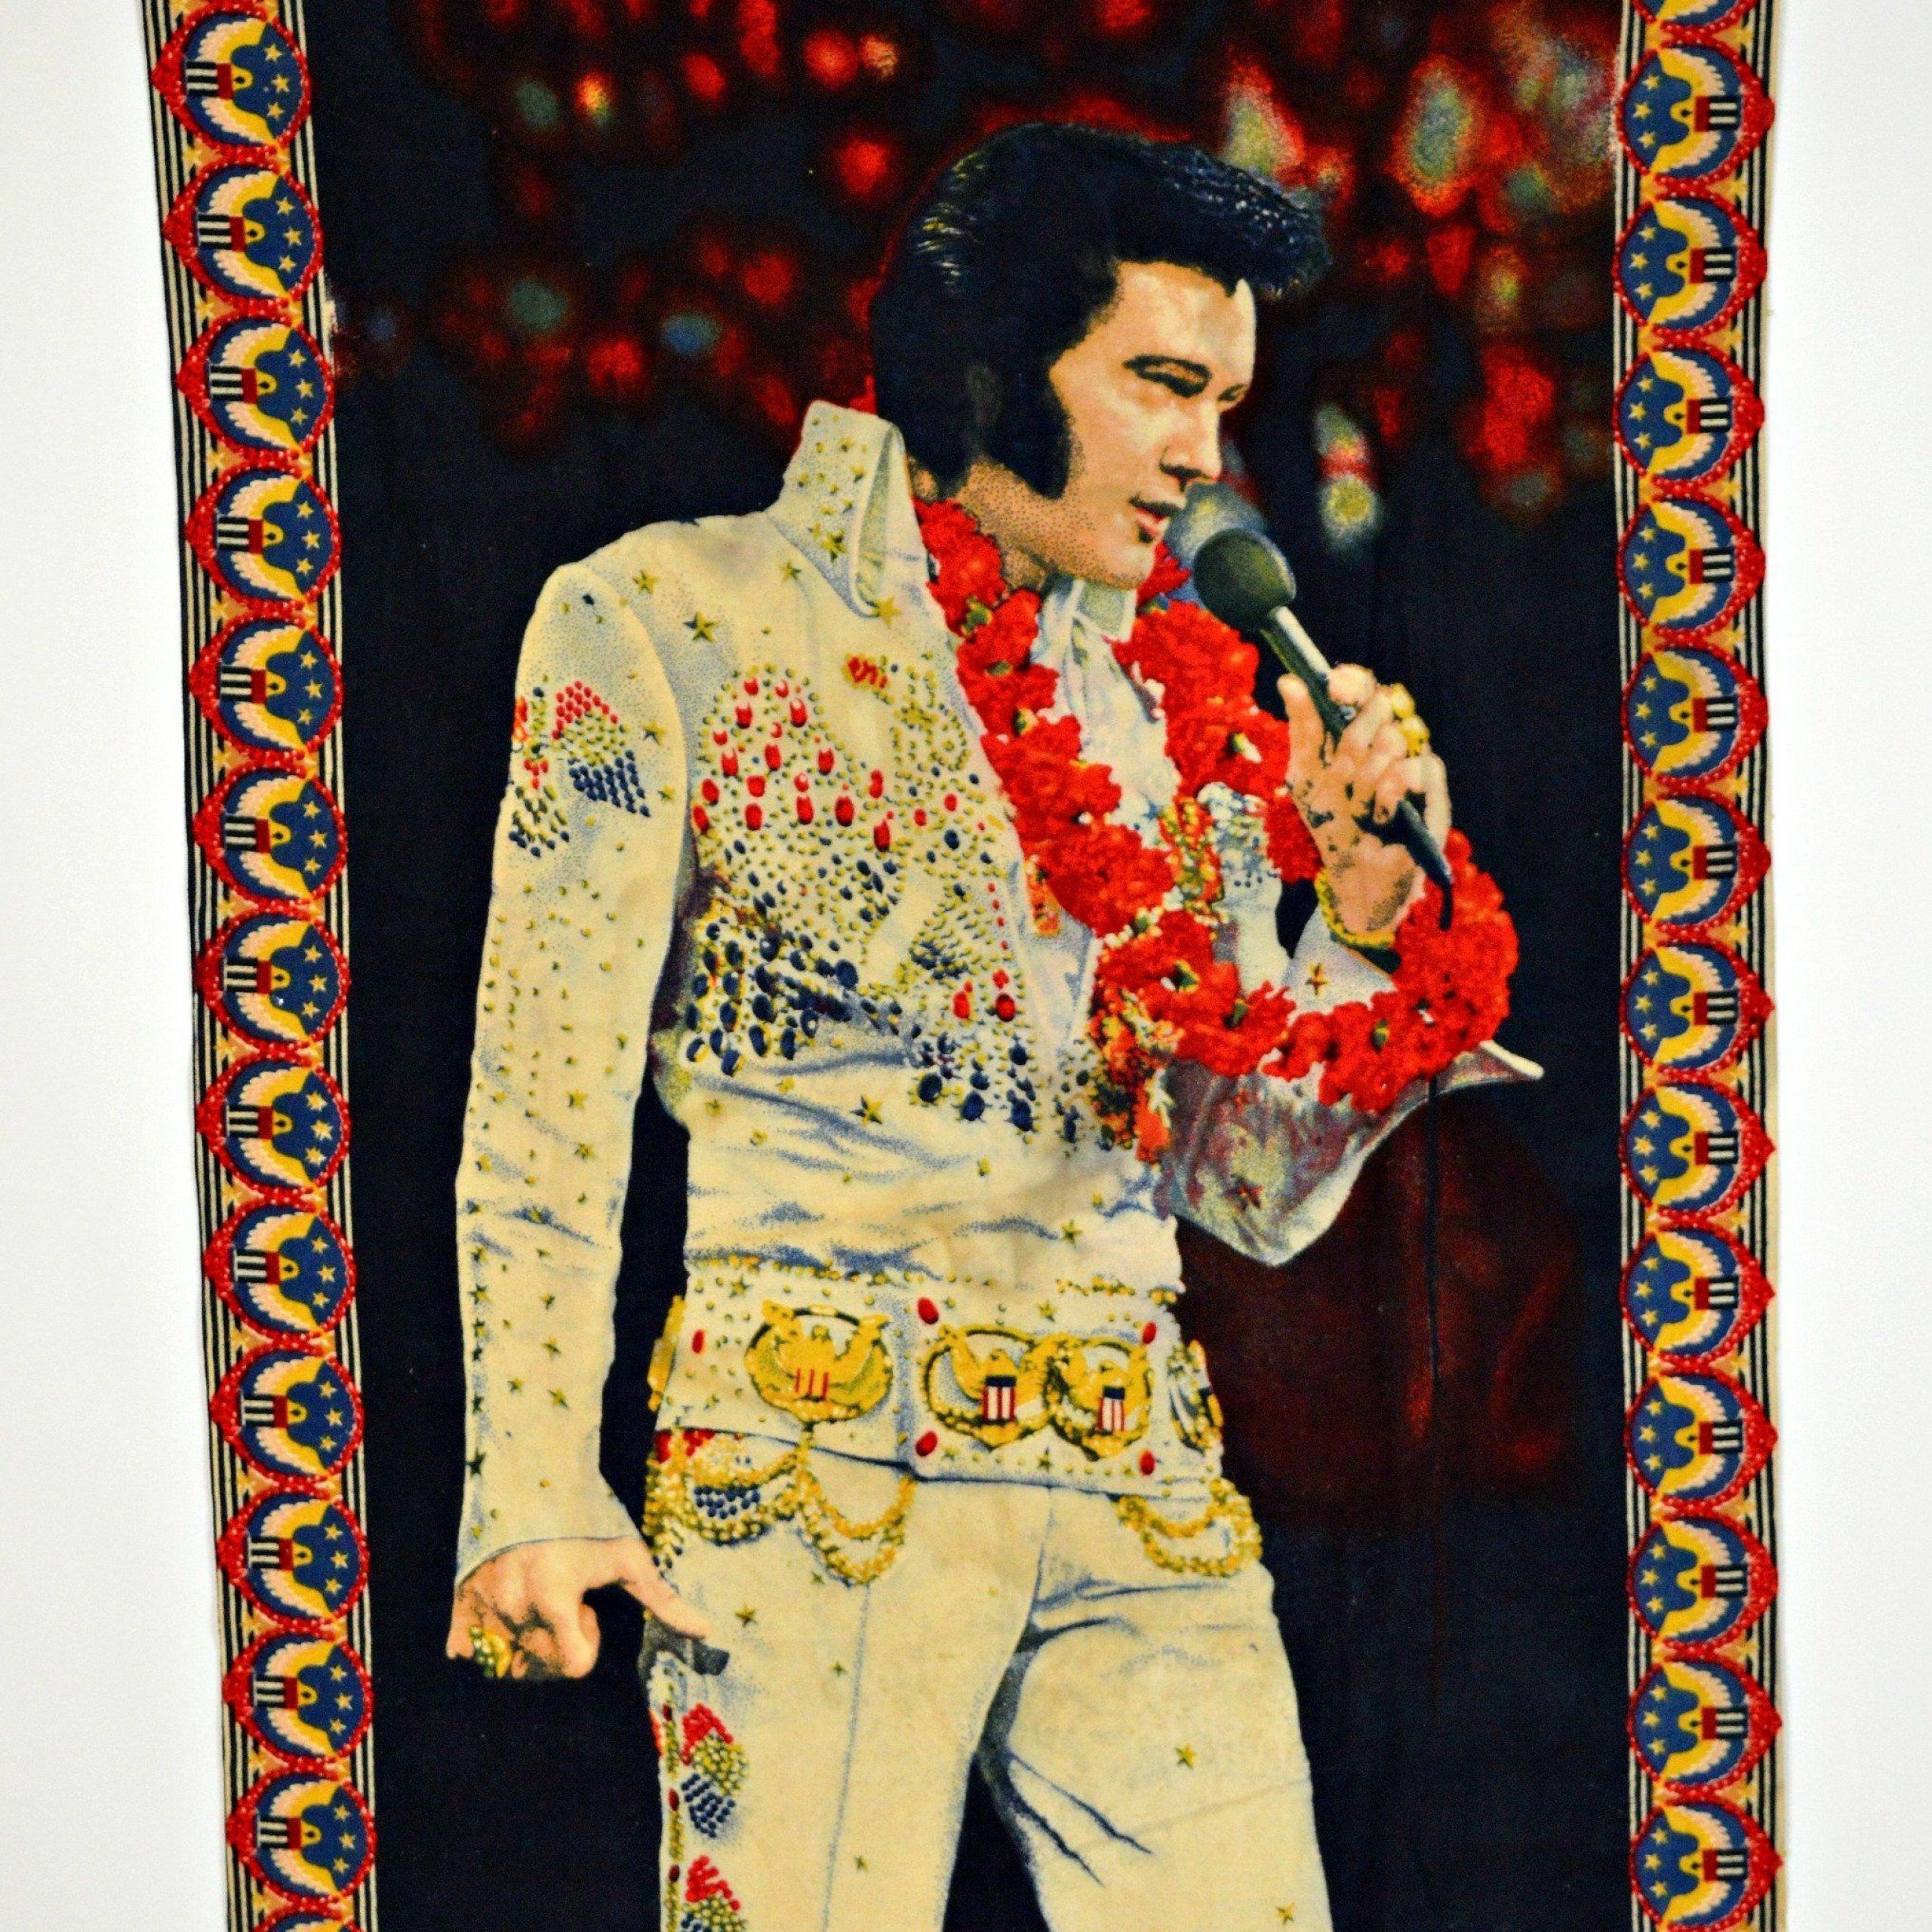 Elvis Wall Hanging Elvis Presley 1970s Elvis King Of Rock Within Most Recently Released Blended Fabric Italian Wall Hangings (View 15 of 20)